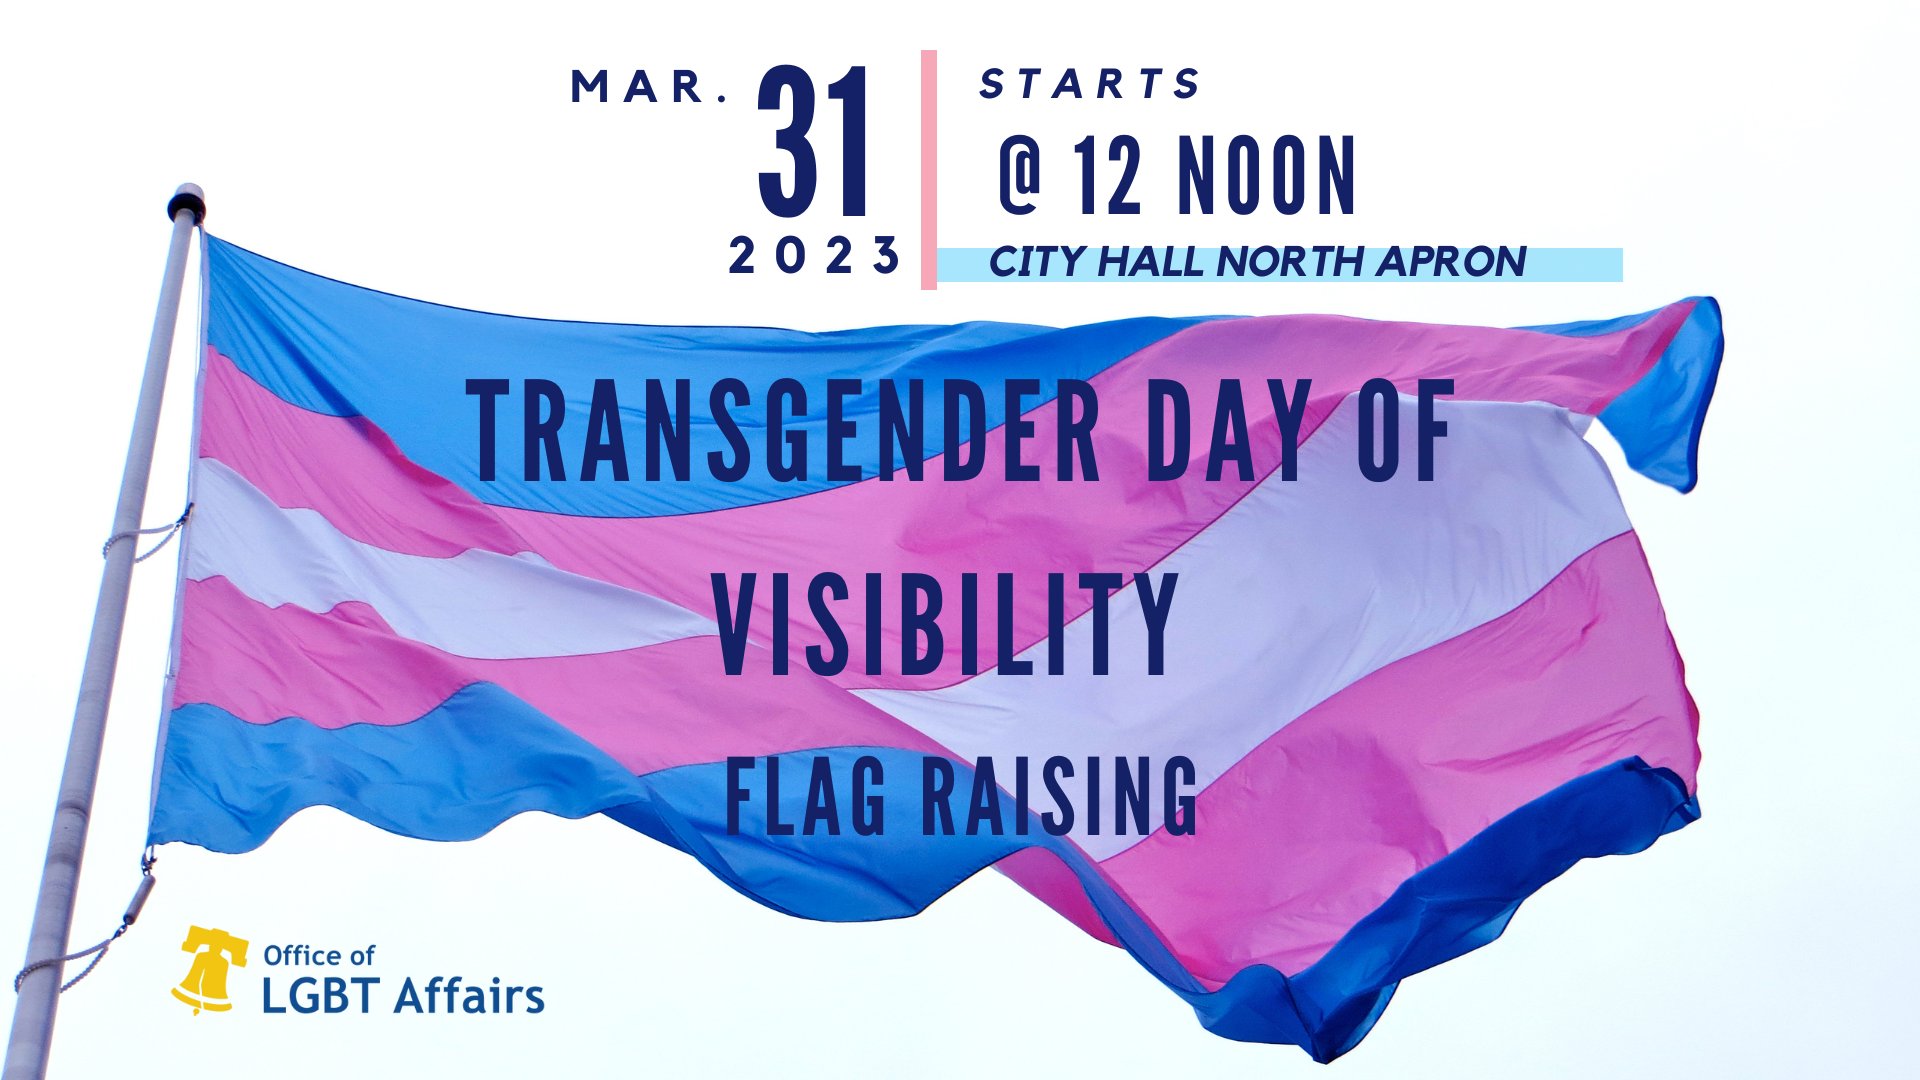 City of Philadelphia on X: The transgender pride flag will be raised at  City Hall to celebrate Trans Day of Visibility! Want to be a part of the  celebration? Join @PhillyLGBTgov along